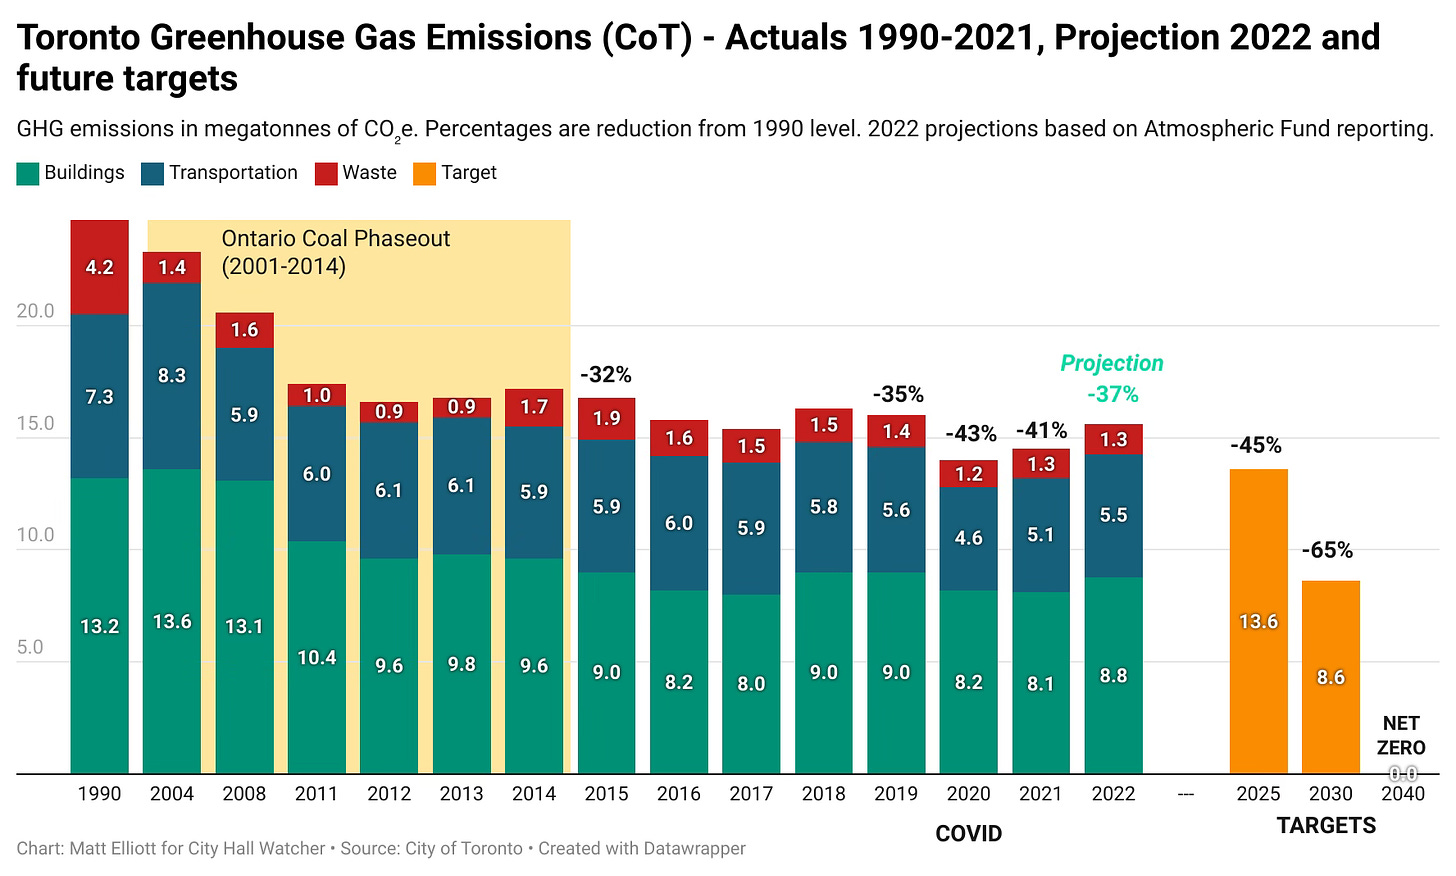 Column chart showing history of annual GHG emissions in Toronto, including a 2022 projection and targets for 2025, 2030 and 2040